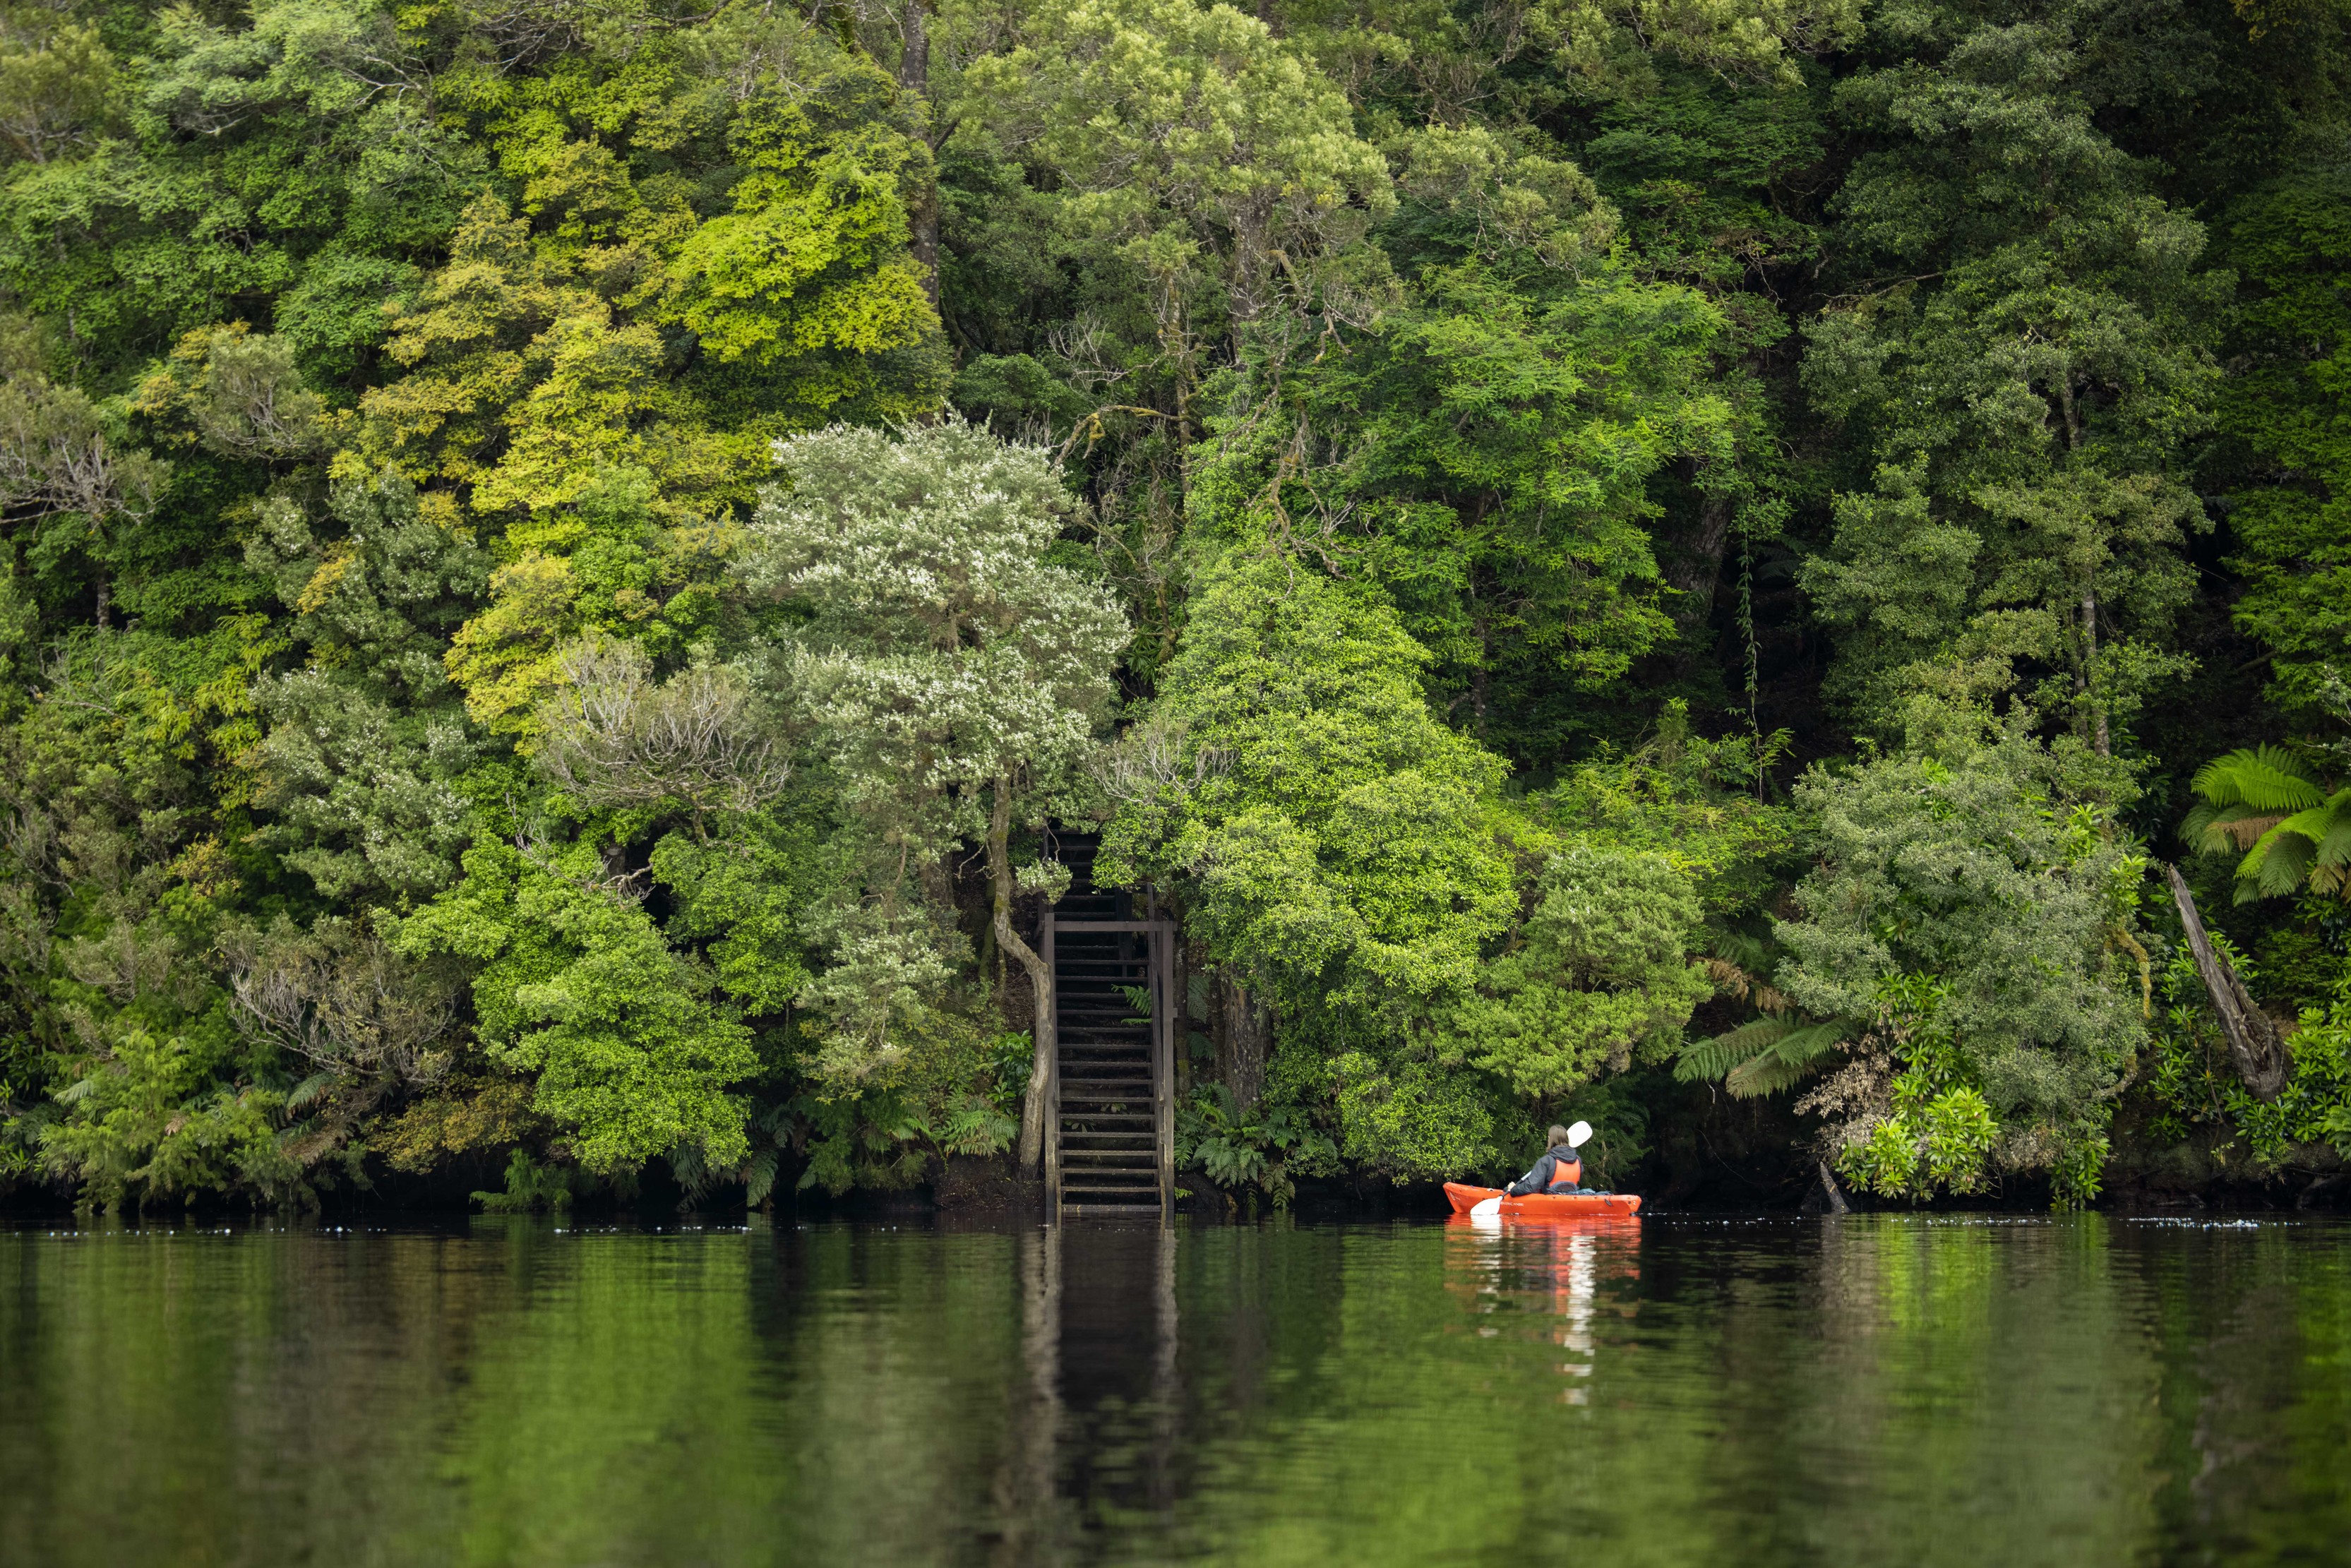 Stunning image of a kayaker on the Pieman River, paddling along side dense, lush green forest.